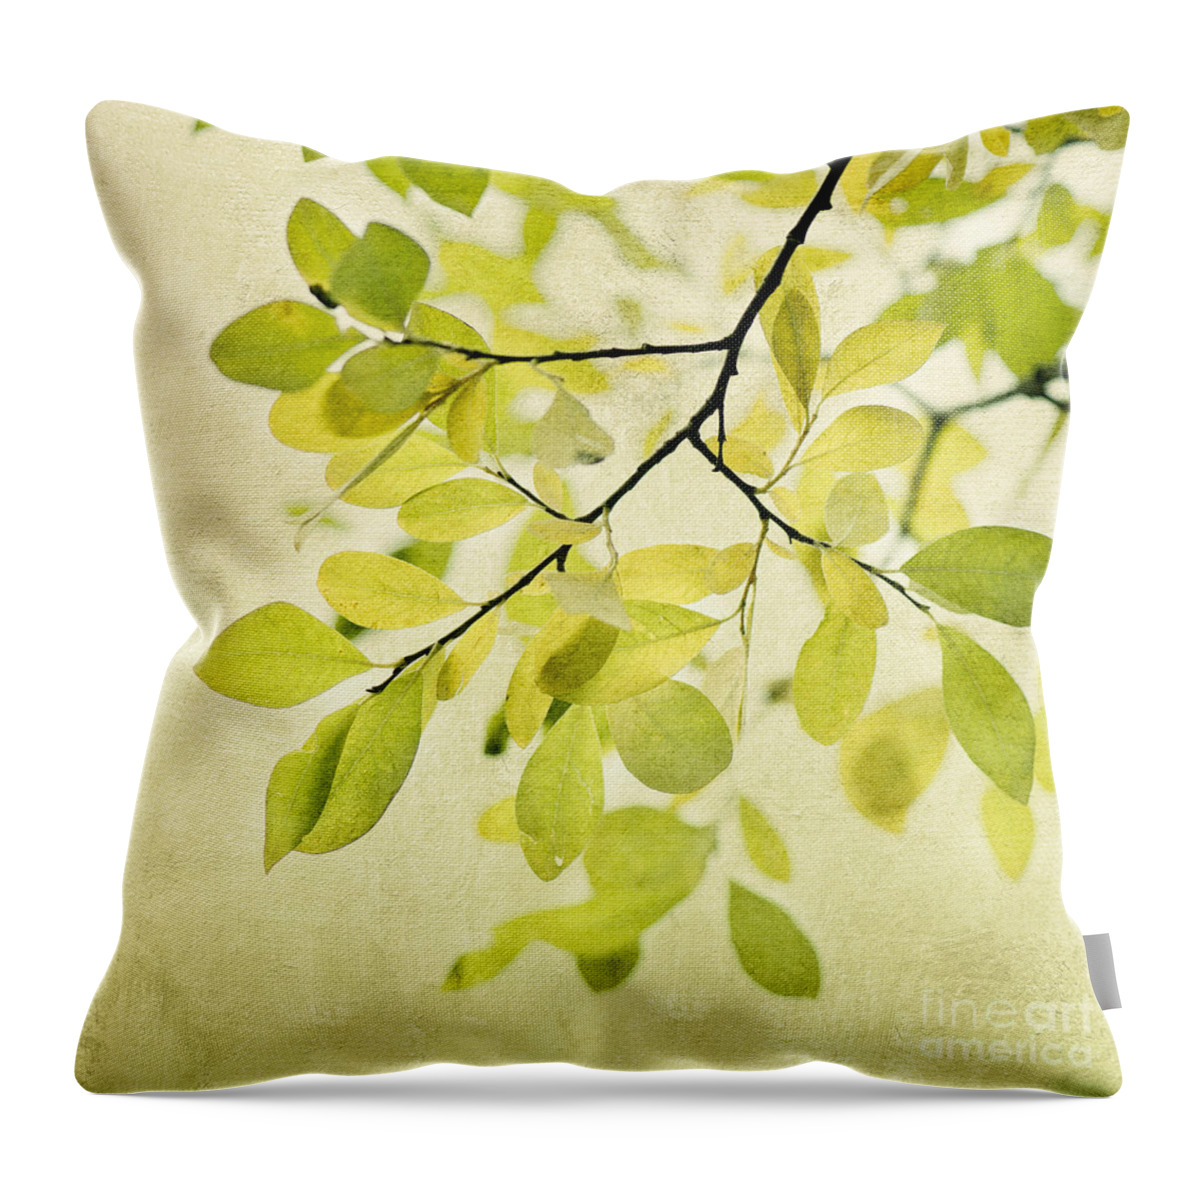 Foliage Throw Pillow featuring the photograph Green Foliage Series #2 by Priska Wettstein